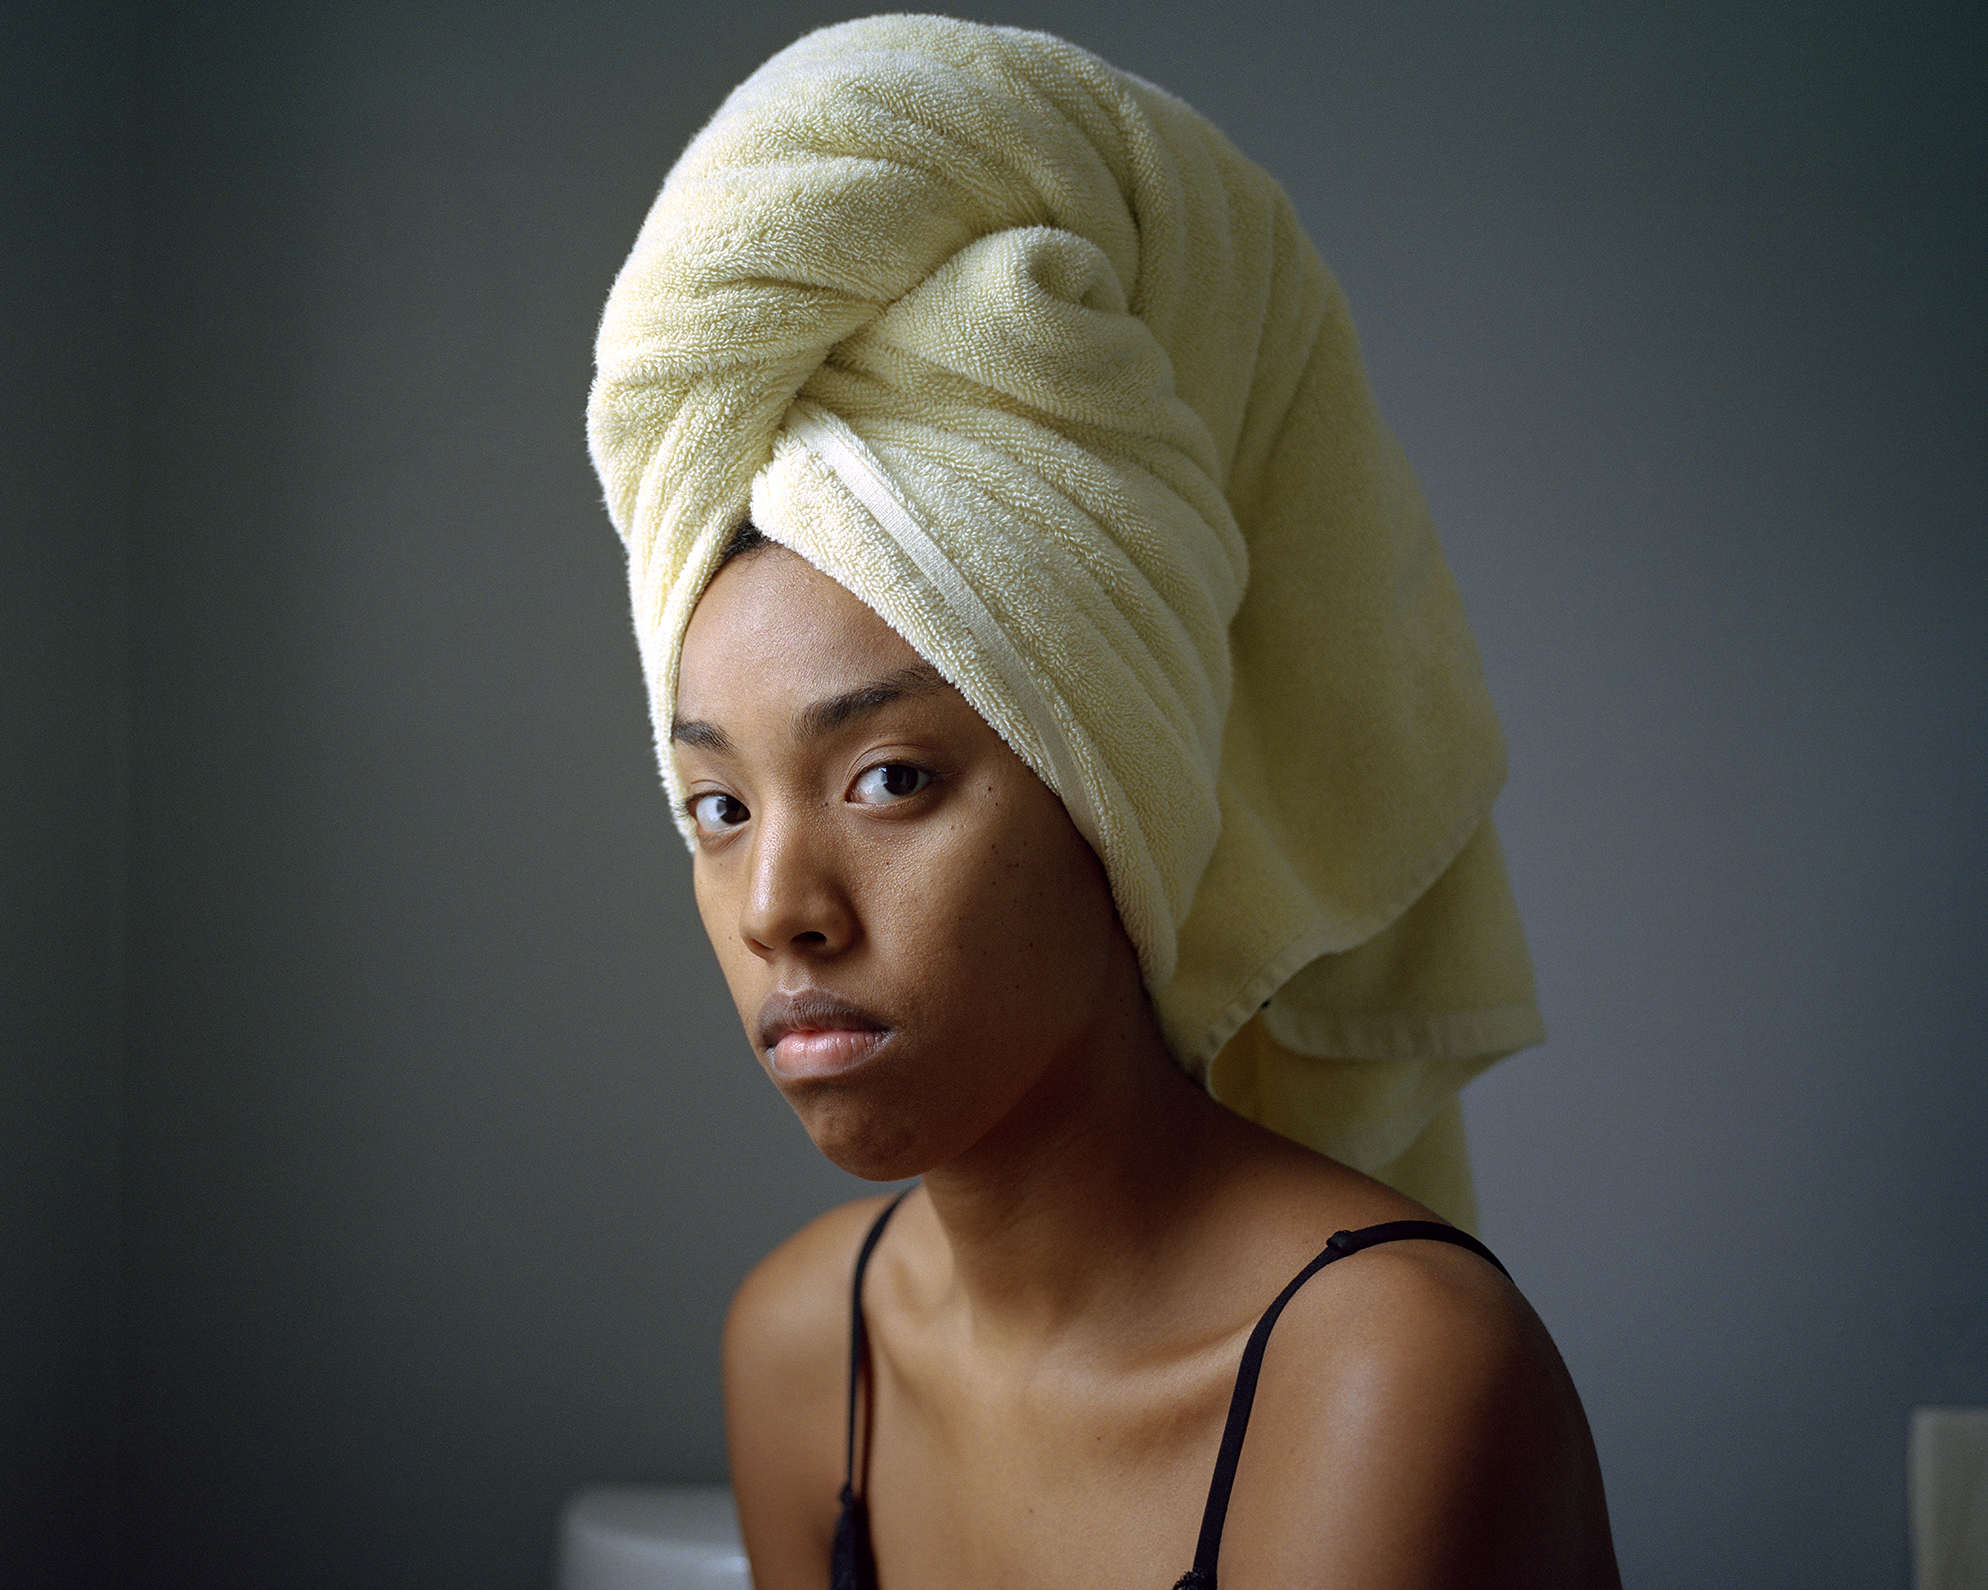 A woman with a medium-dark skin tone wears a yellow towel wrapped around her hair. She is looking directly at the camera with a questioning glance, sitting before an empty dark grey wall. 